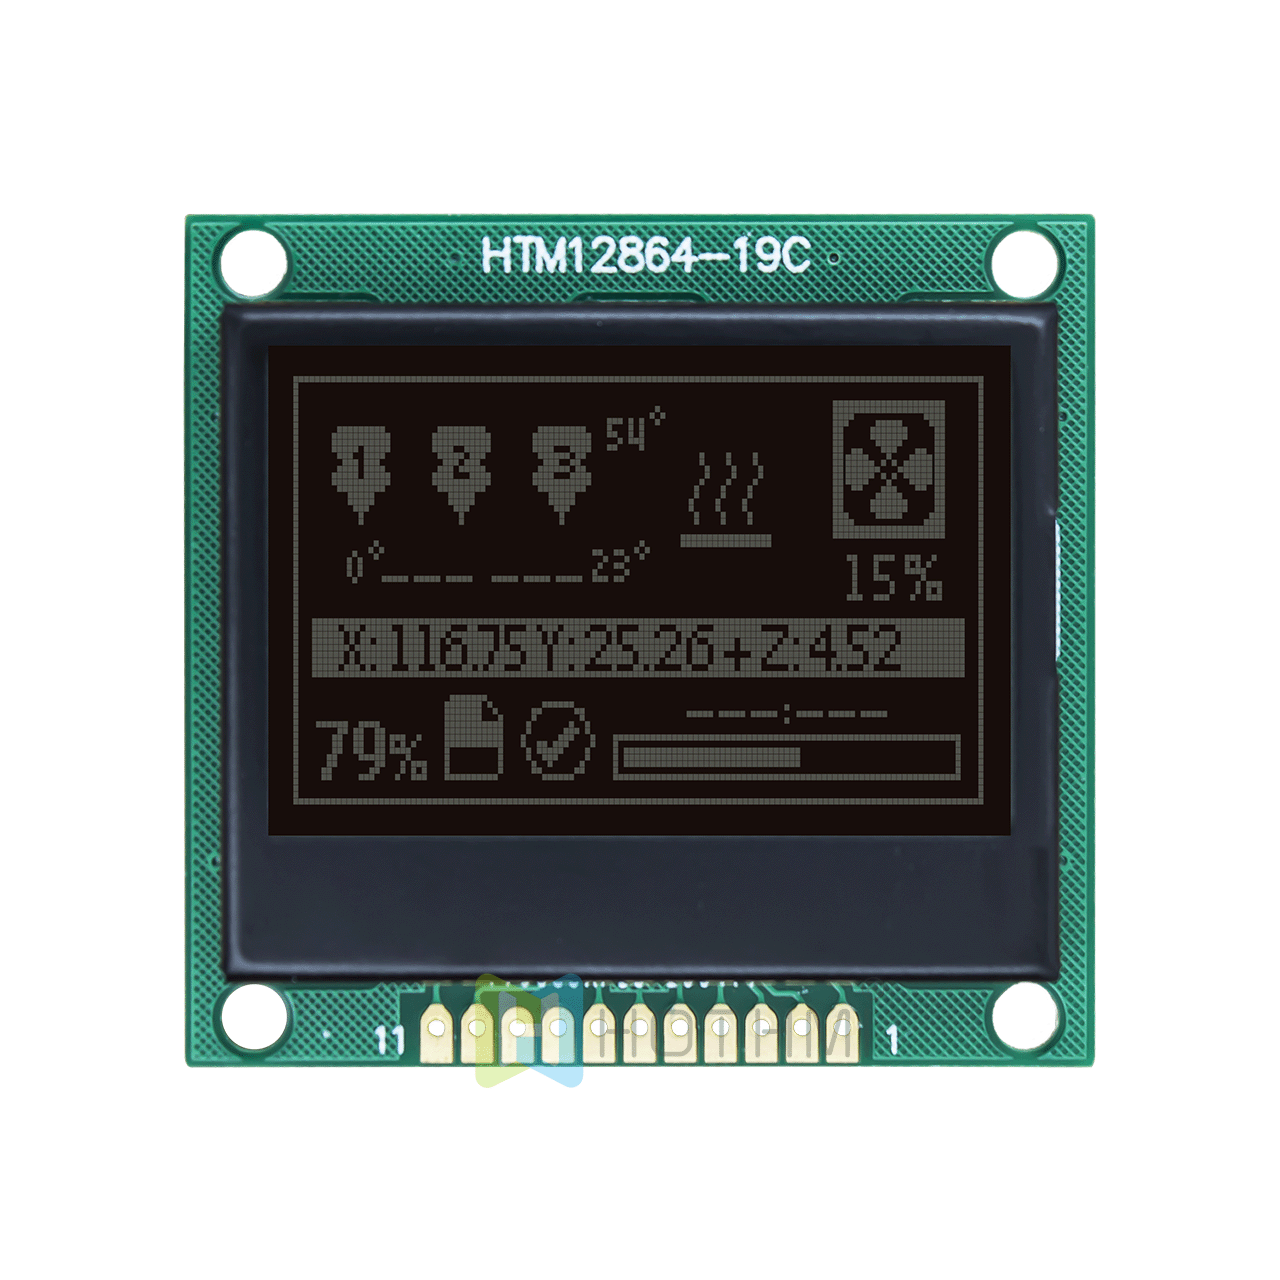 1.7 inch 128 x 64 LCD graphic display | 12864 LCD graphic display module | SPI interface | DSTN negative black background white text display | transflective polarizer